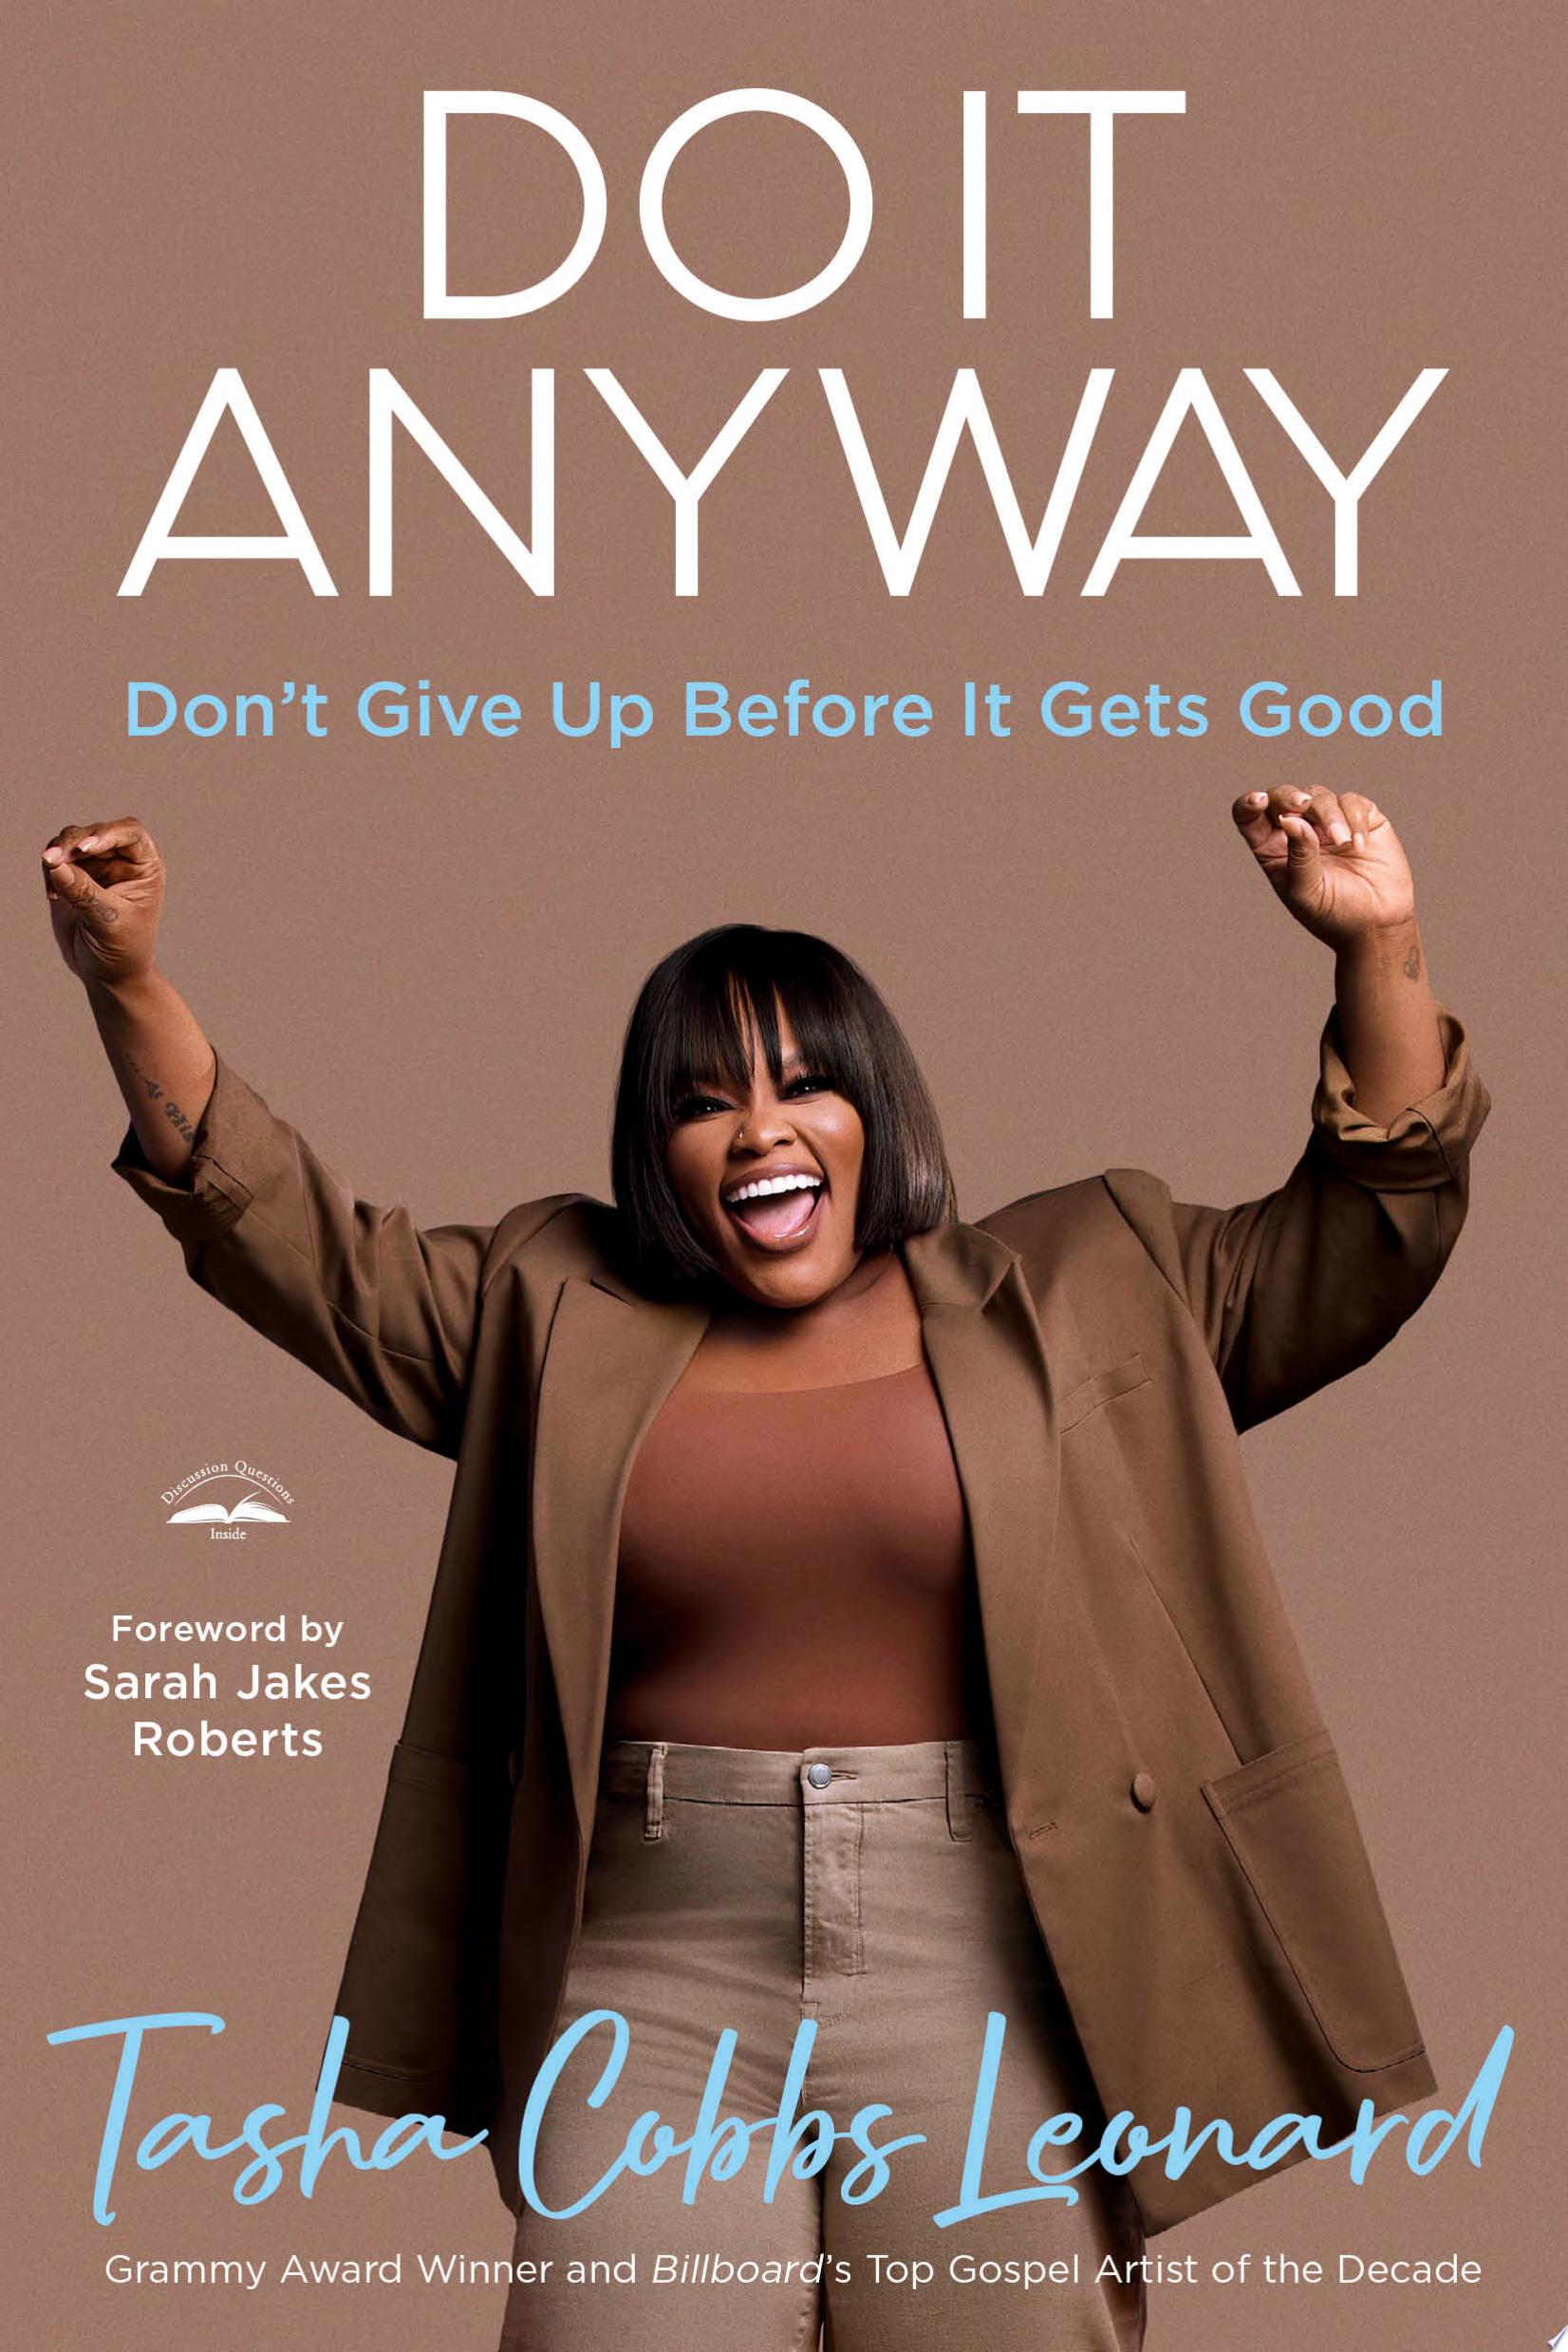 Image for "Do It Anyway"